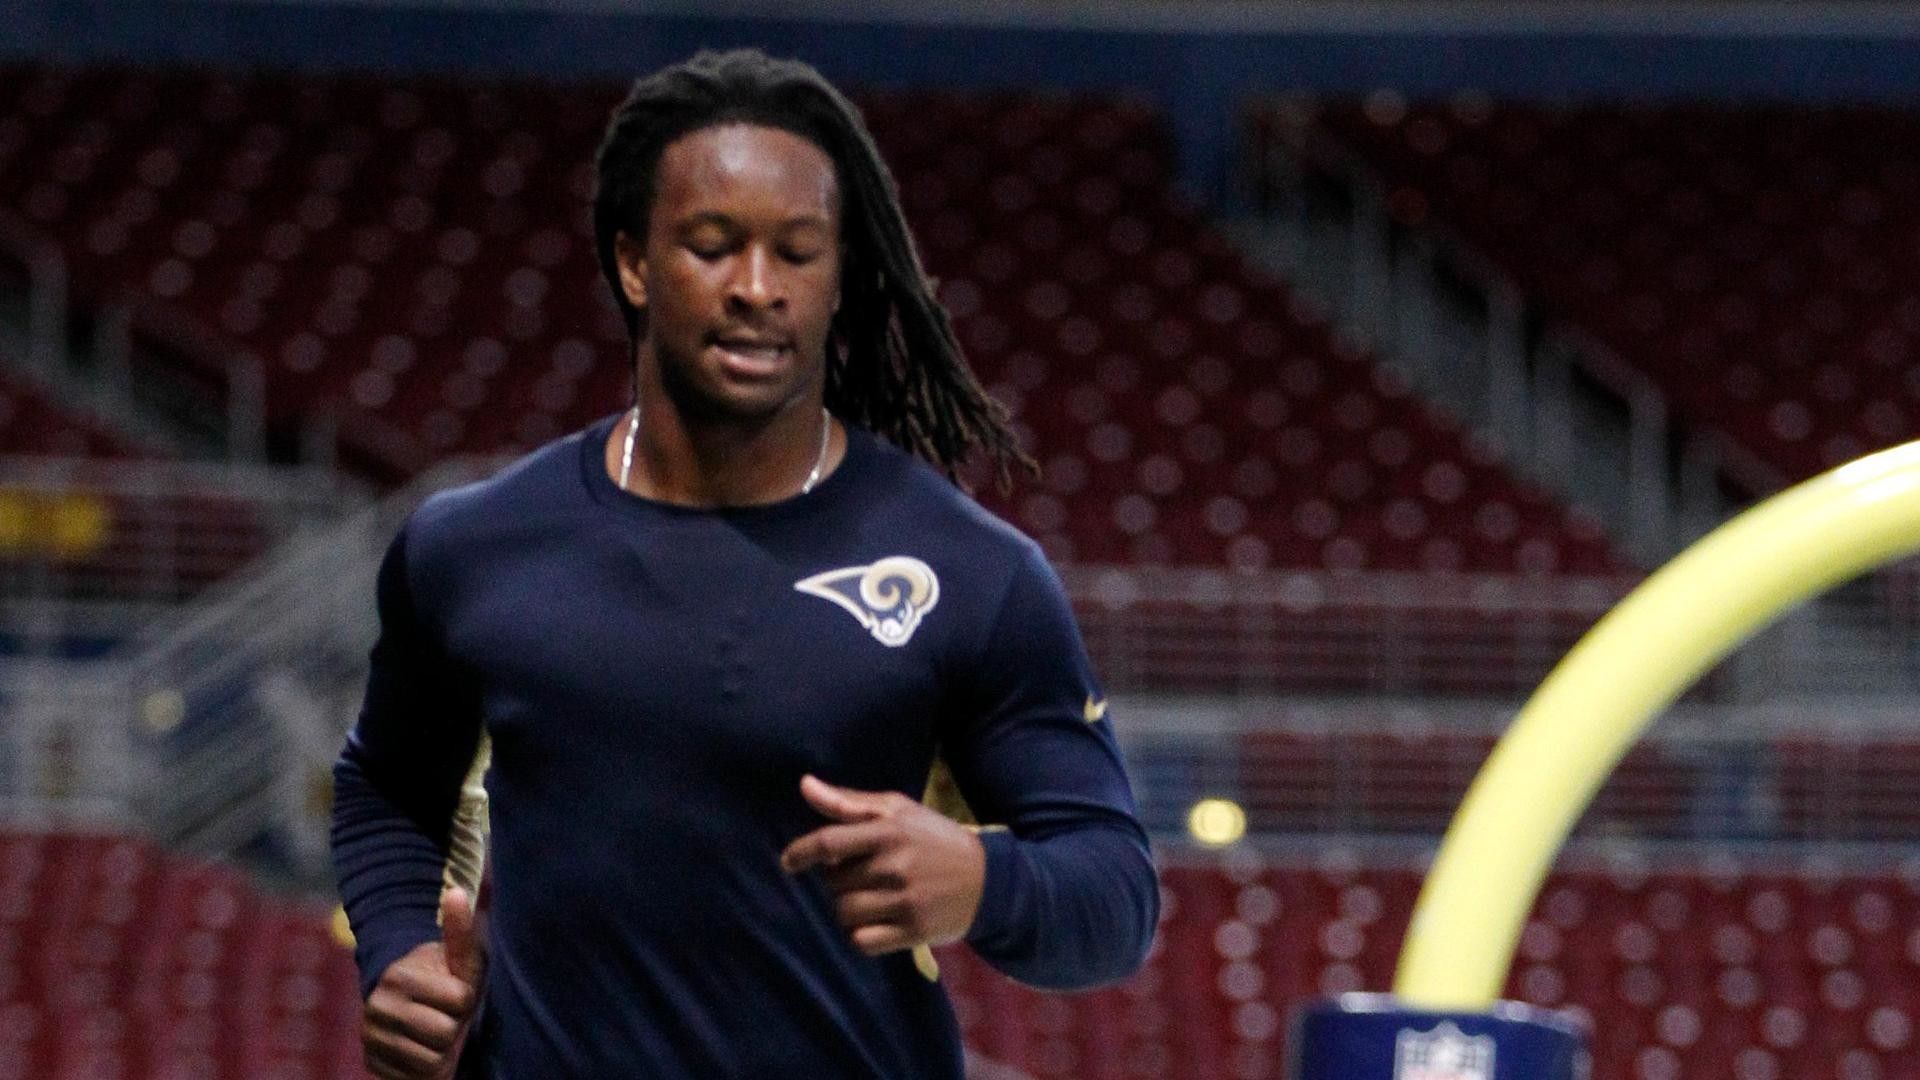 1920x1080 Todd Gurley to make NFL debut Sunday vs. Steelers